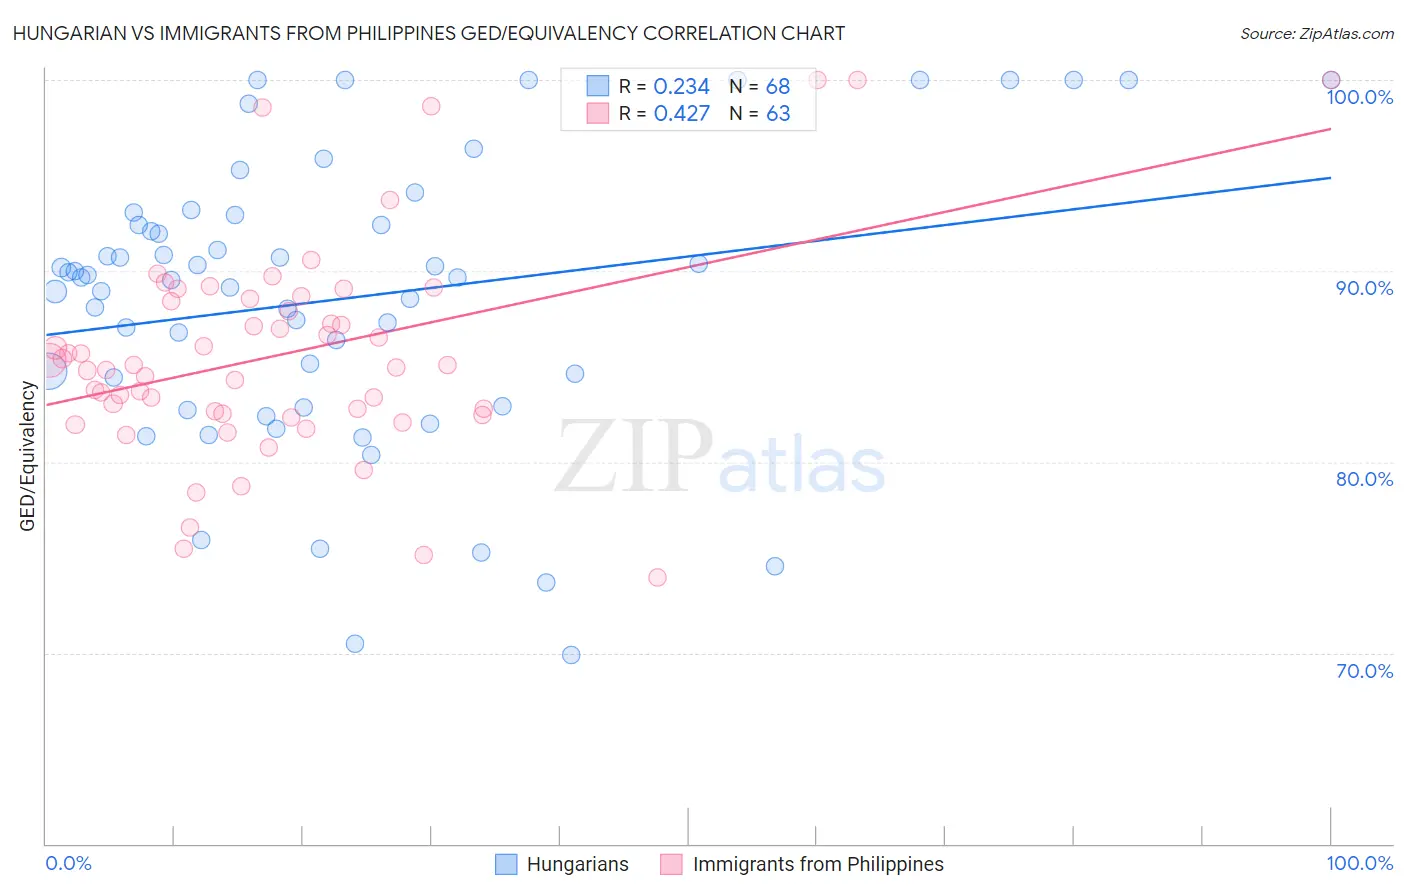 Hungarian vs Immigrants from Philippines GED/Equivalency